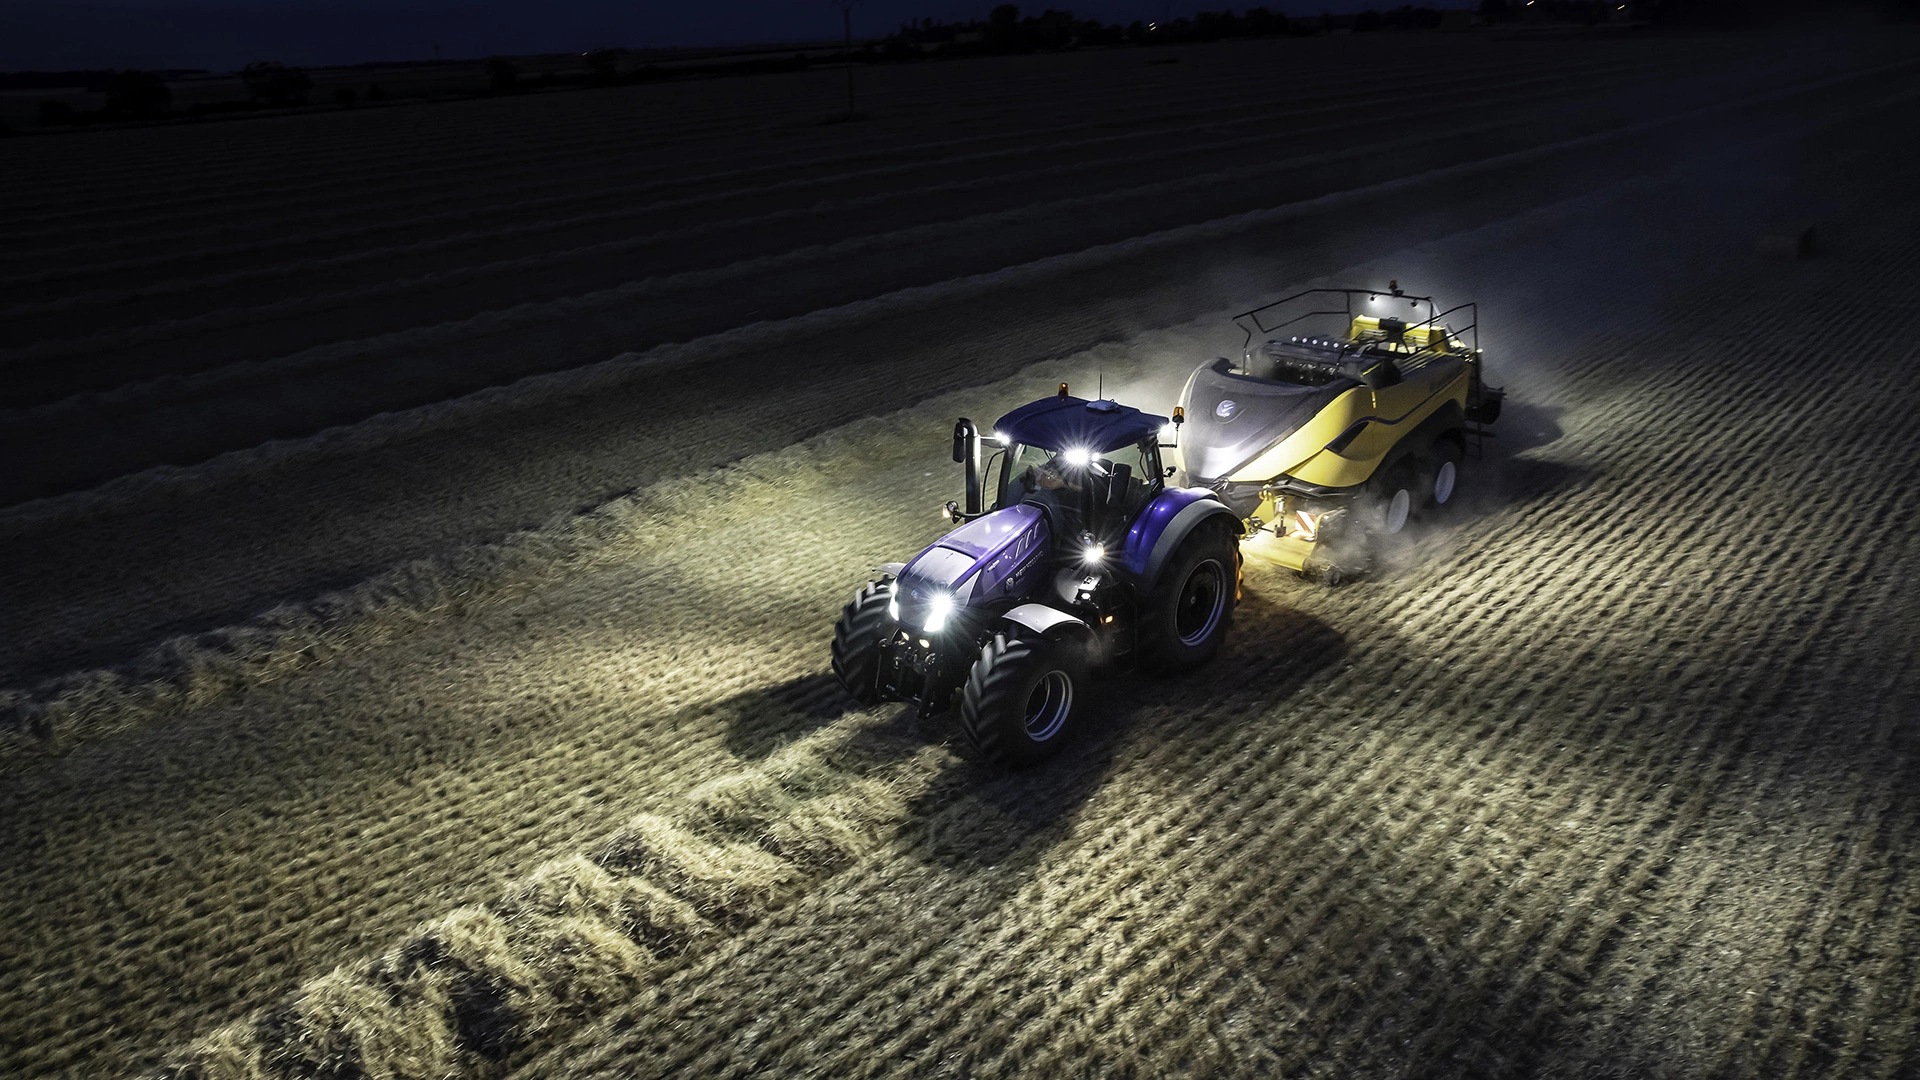 Tractor in action, operating a Bigbaler High Density on an agricultural field during the night